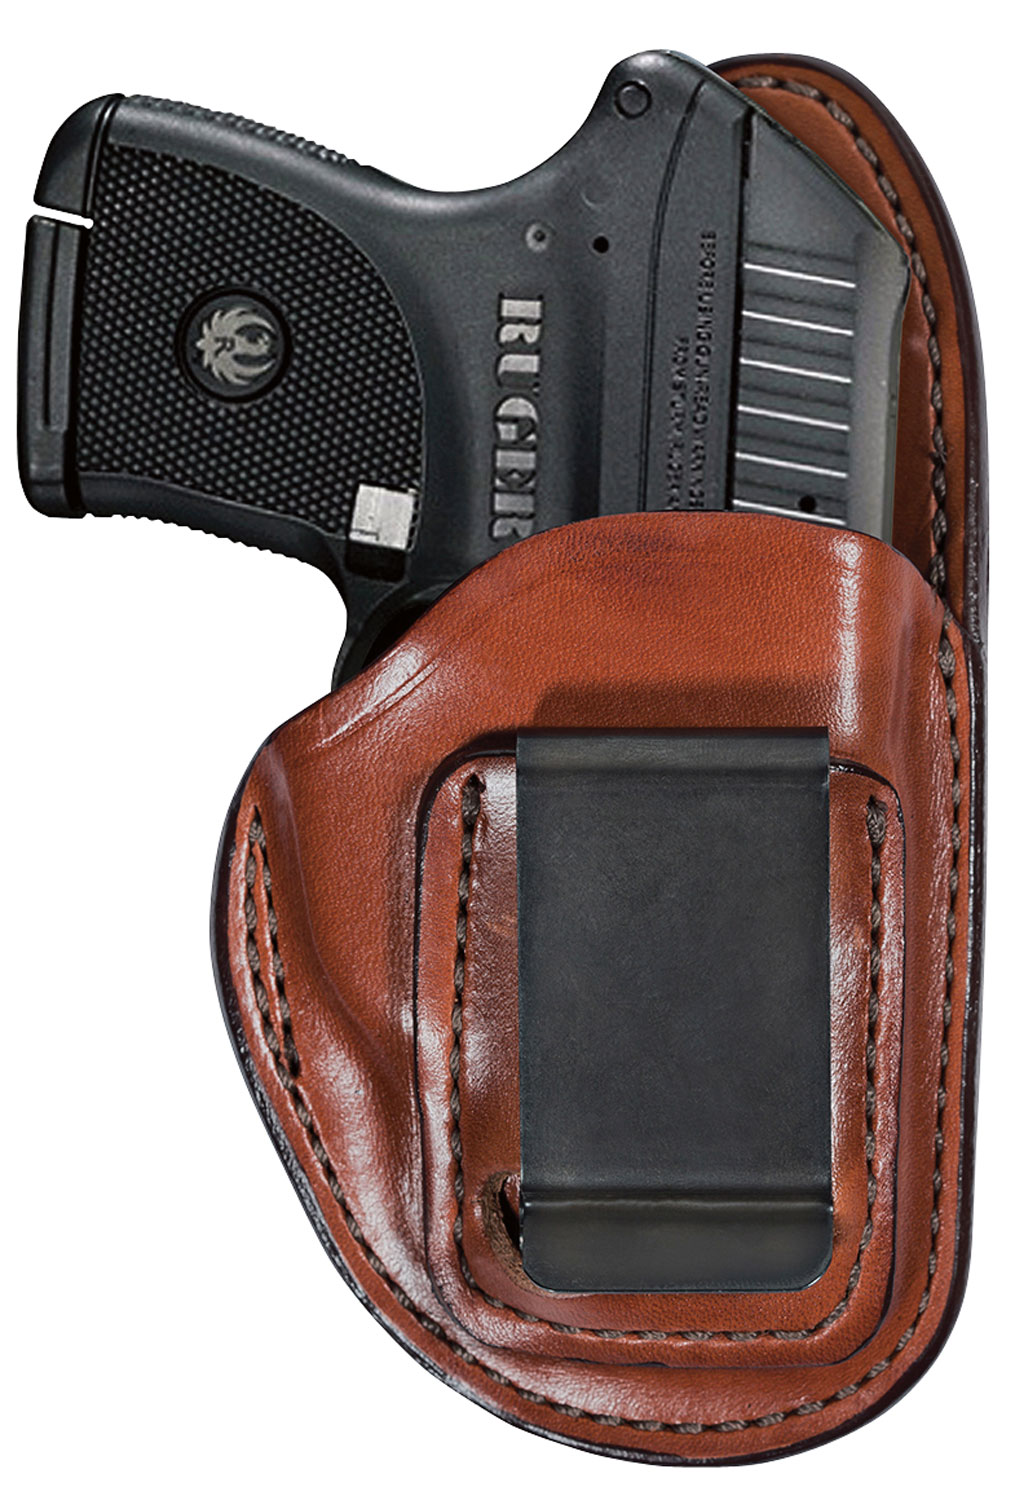 Bianchi 19236 Professional  Tan Leather IWB Fits Glock 17/22/36; Sig P220/P226; S&W 411/909 Right Hand